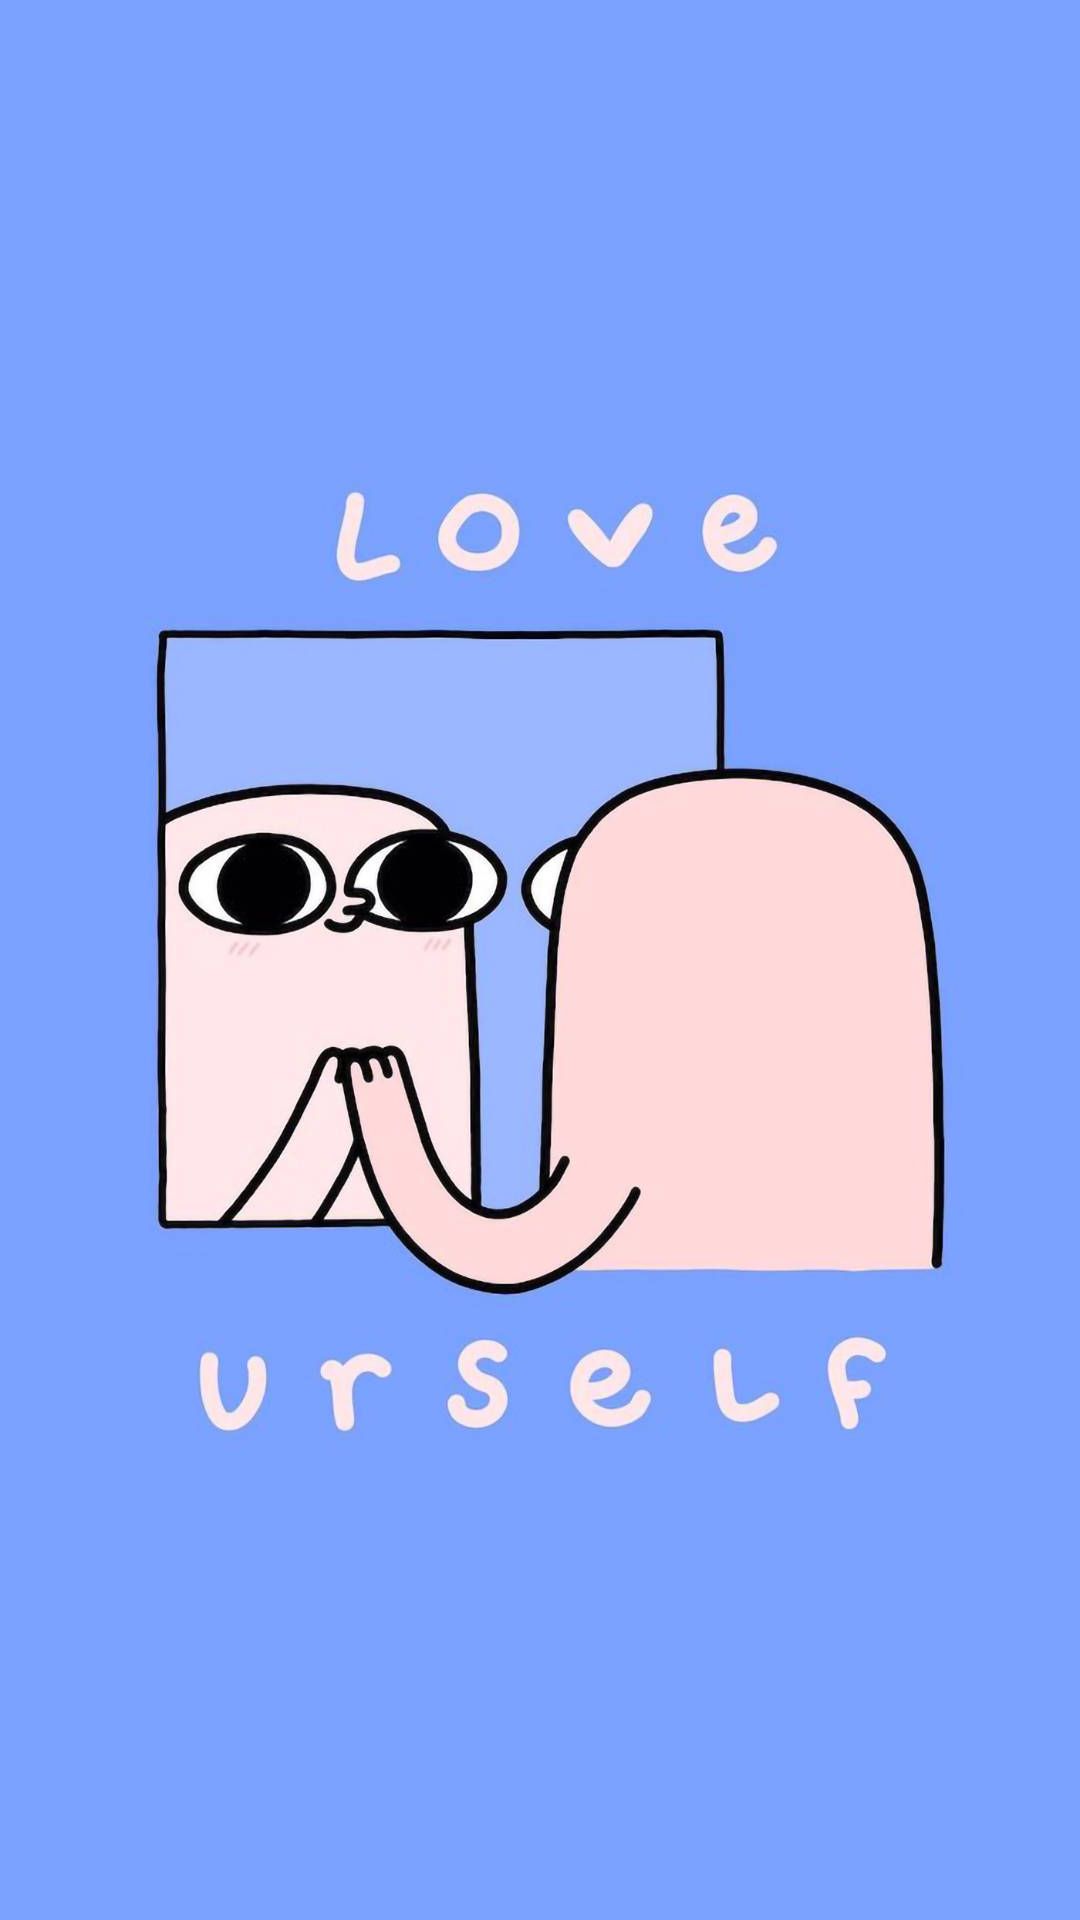 Love urself wallpaper for iPhone and Android phone - Funny